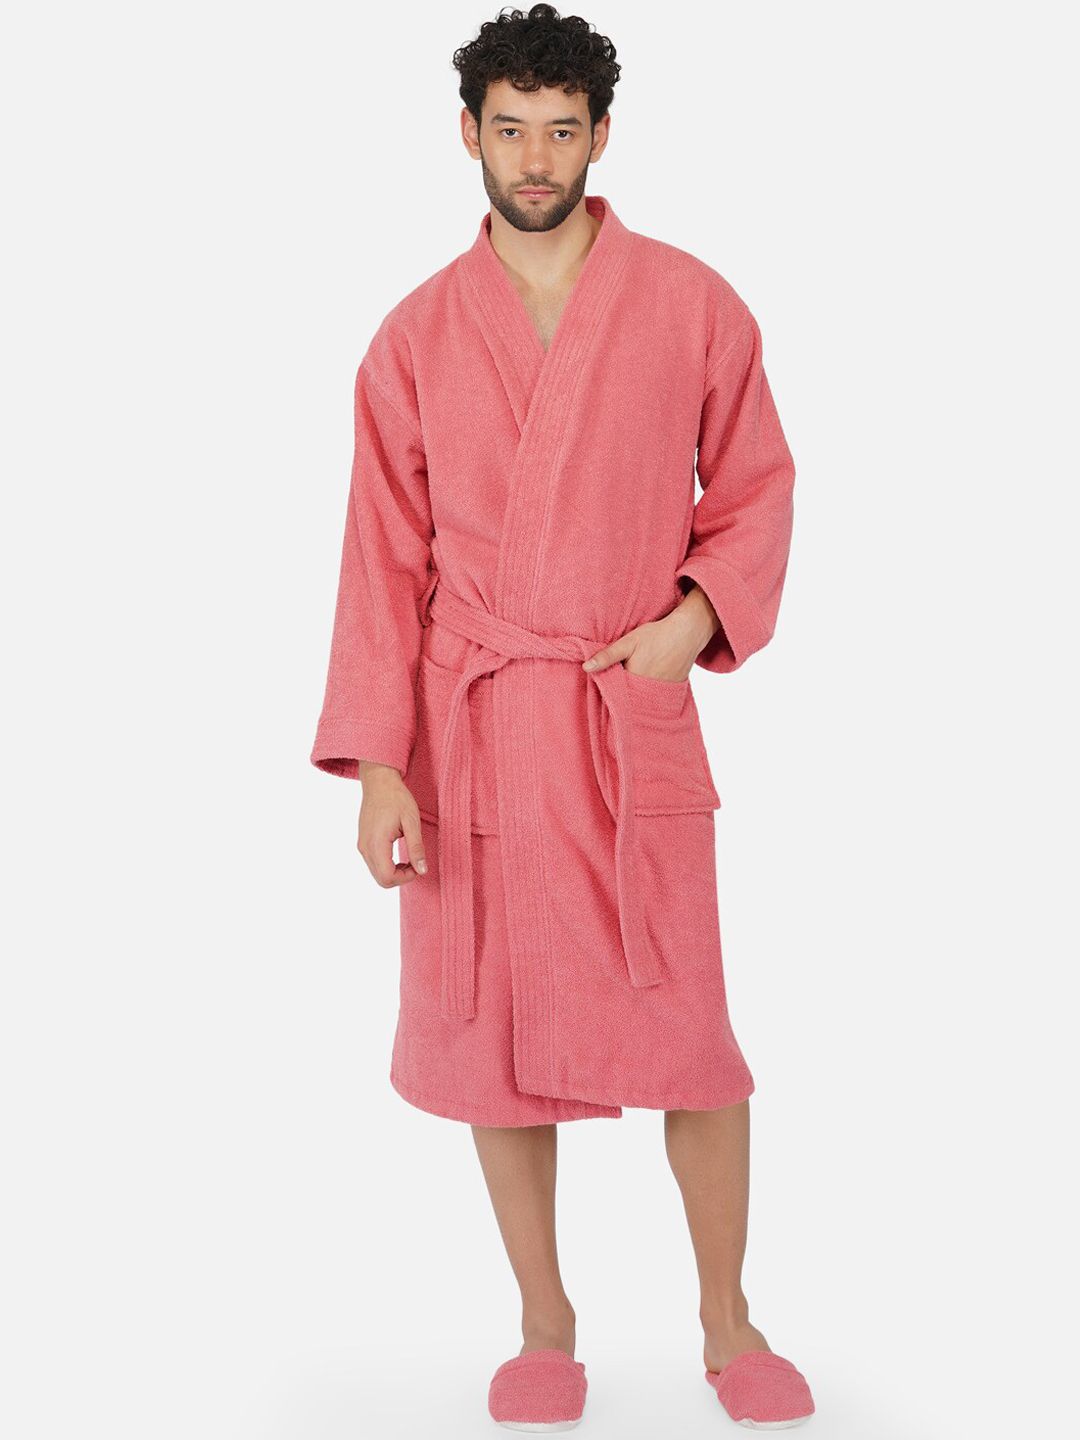 RANGOLI Unisex Coral Pink Pure Cotton 400 GSM Large Bath Robe with Slippers Price in India